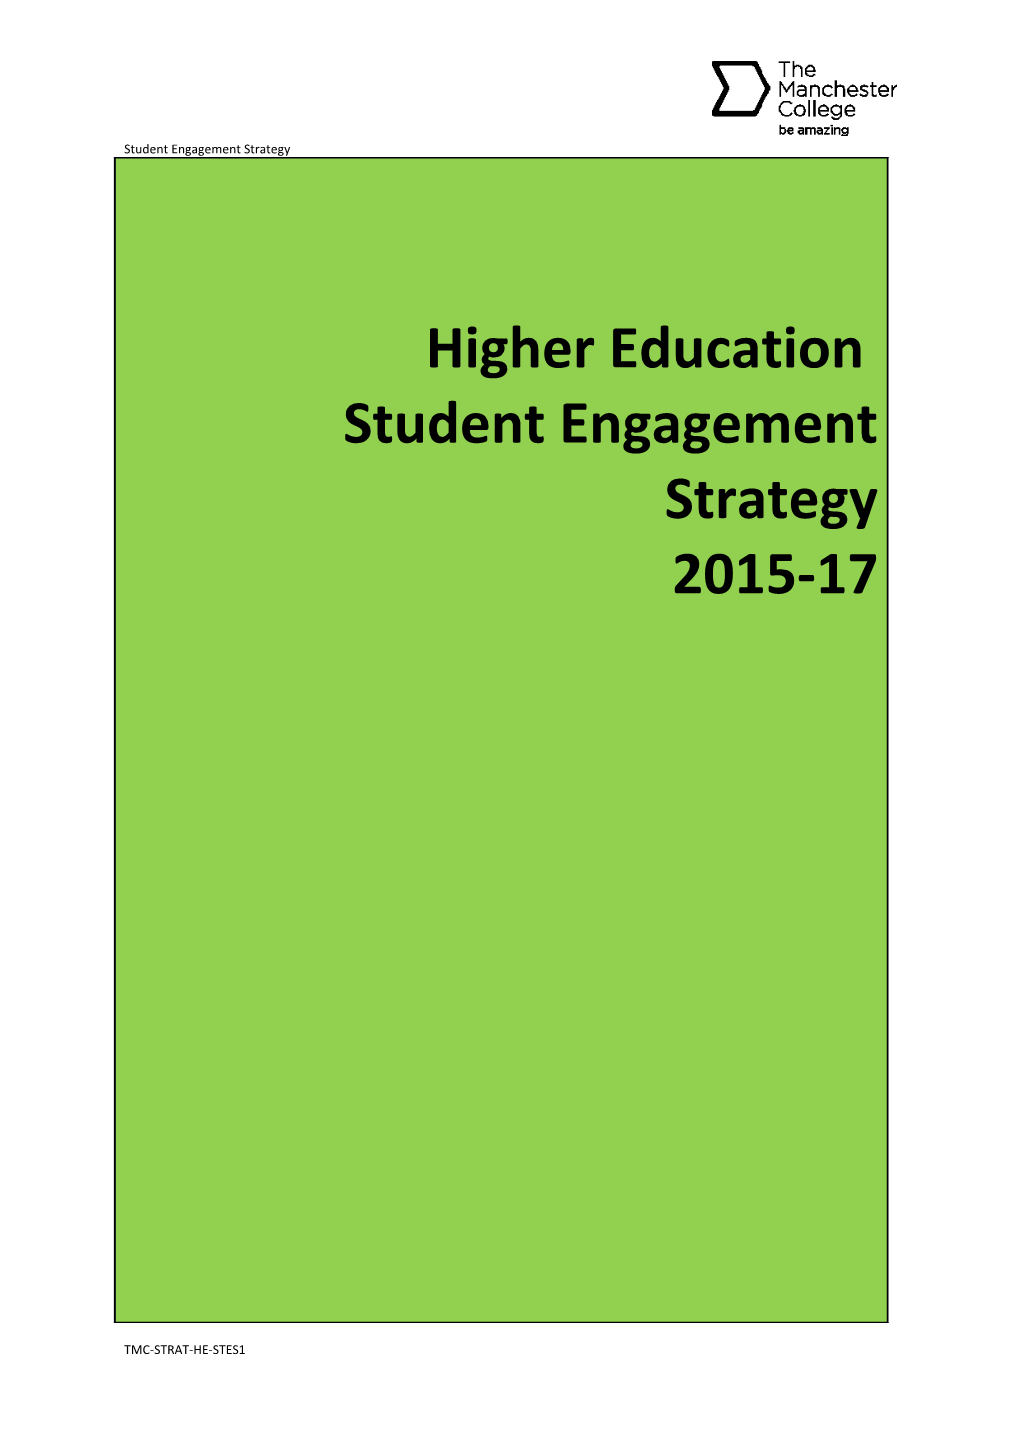 Student Engagement Strategy